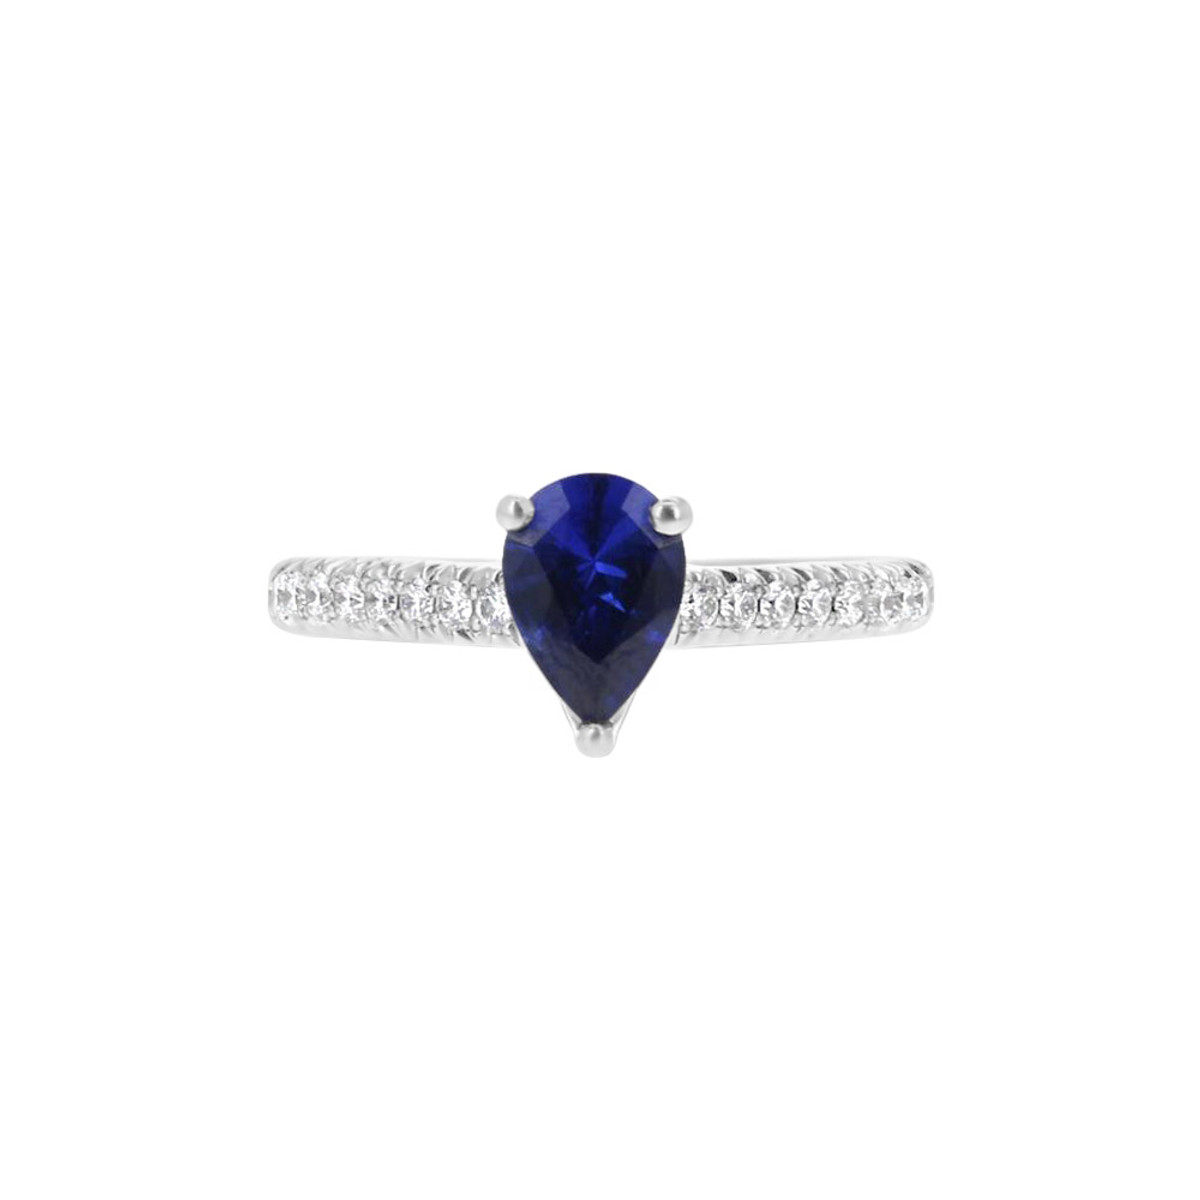 Engage By Hyde Park 18K White Gold 0.97ct Pear Sapphire & Diamond Ring-DCQTS0256 Product Image